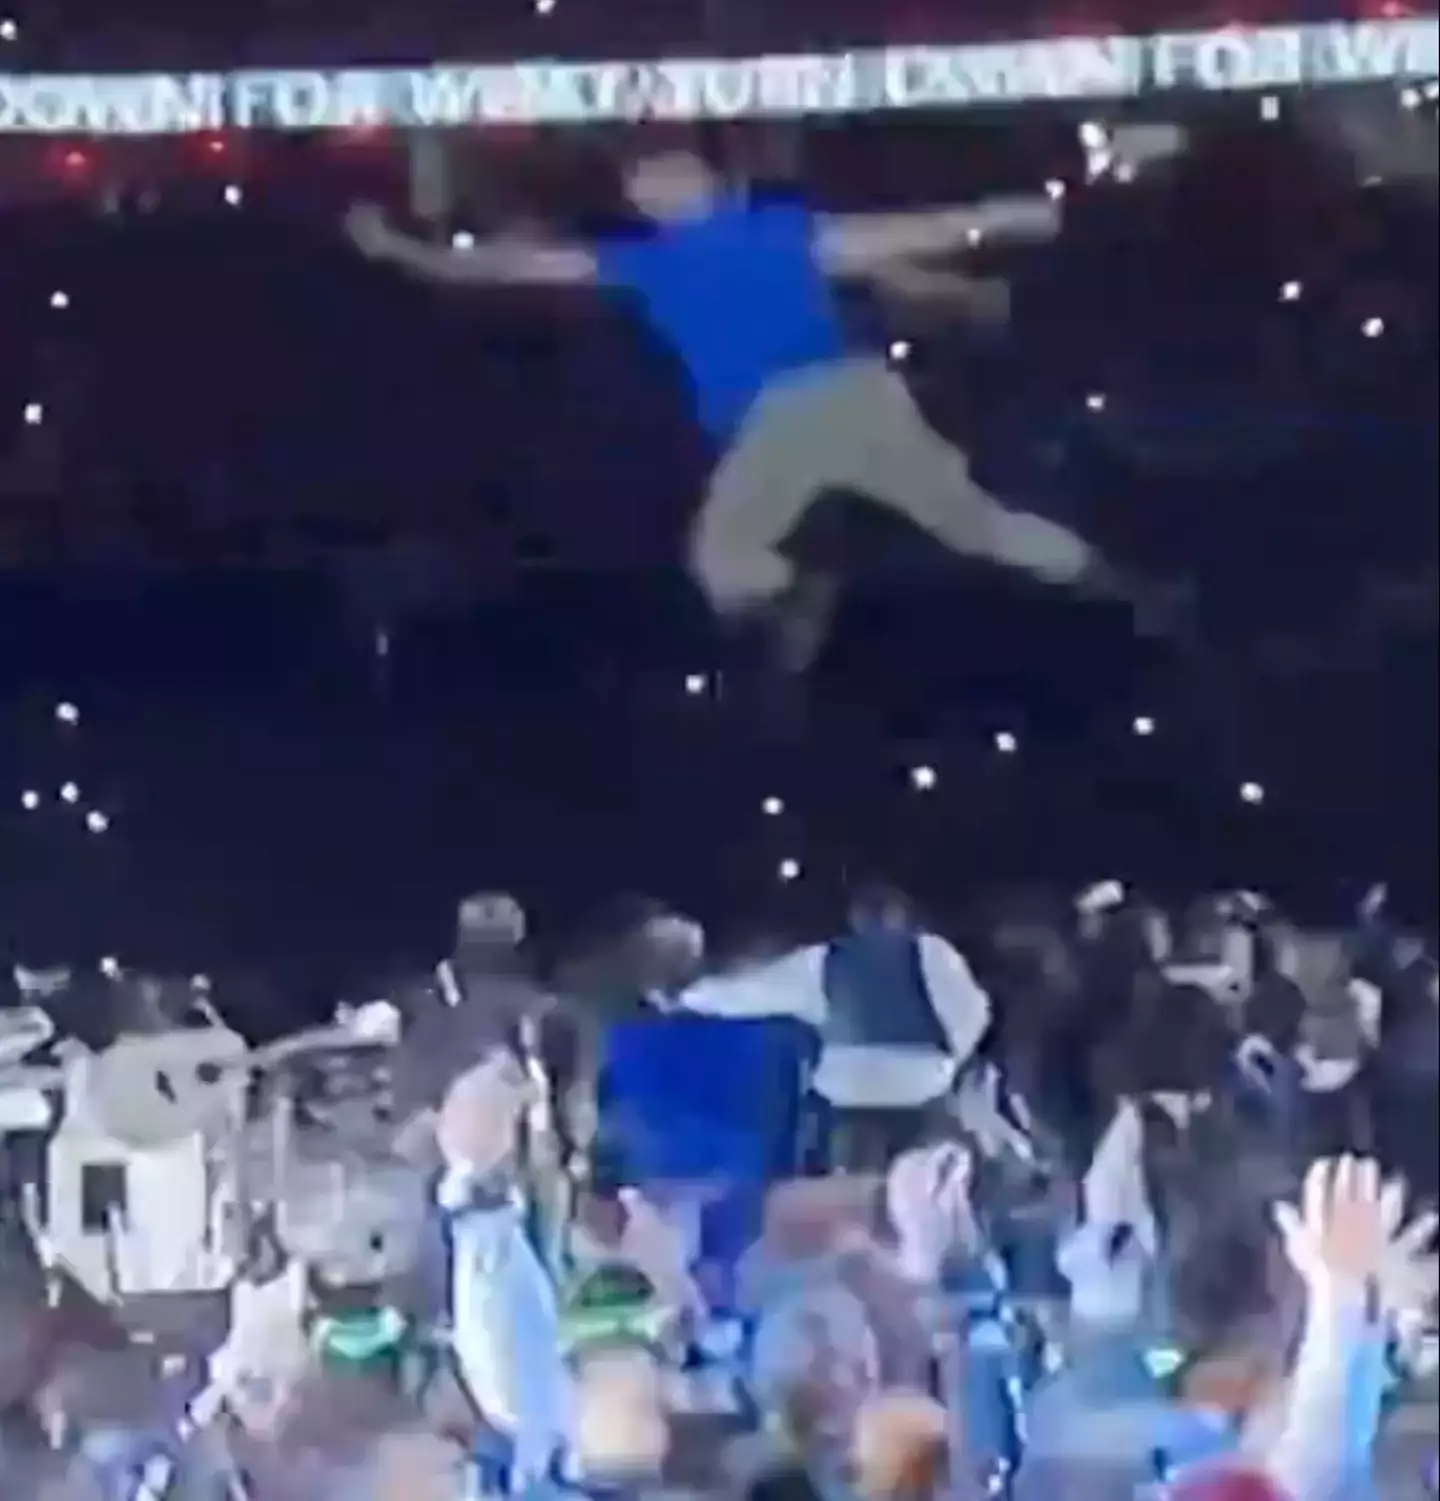 One Usher fan had an insane view of the halftime show when he was launched into the sky.